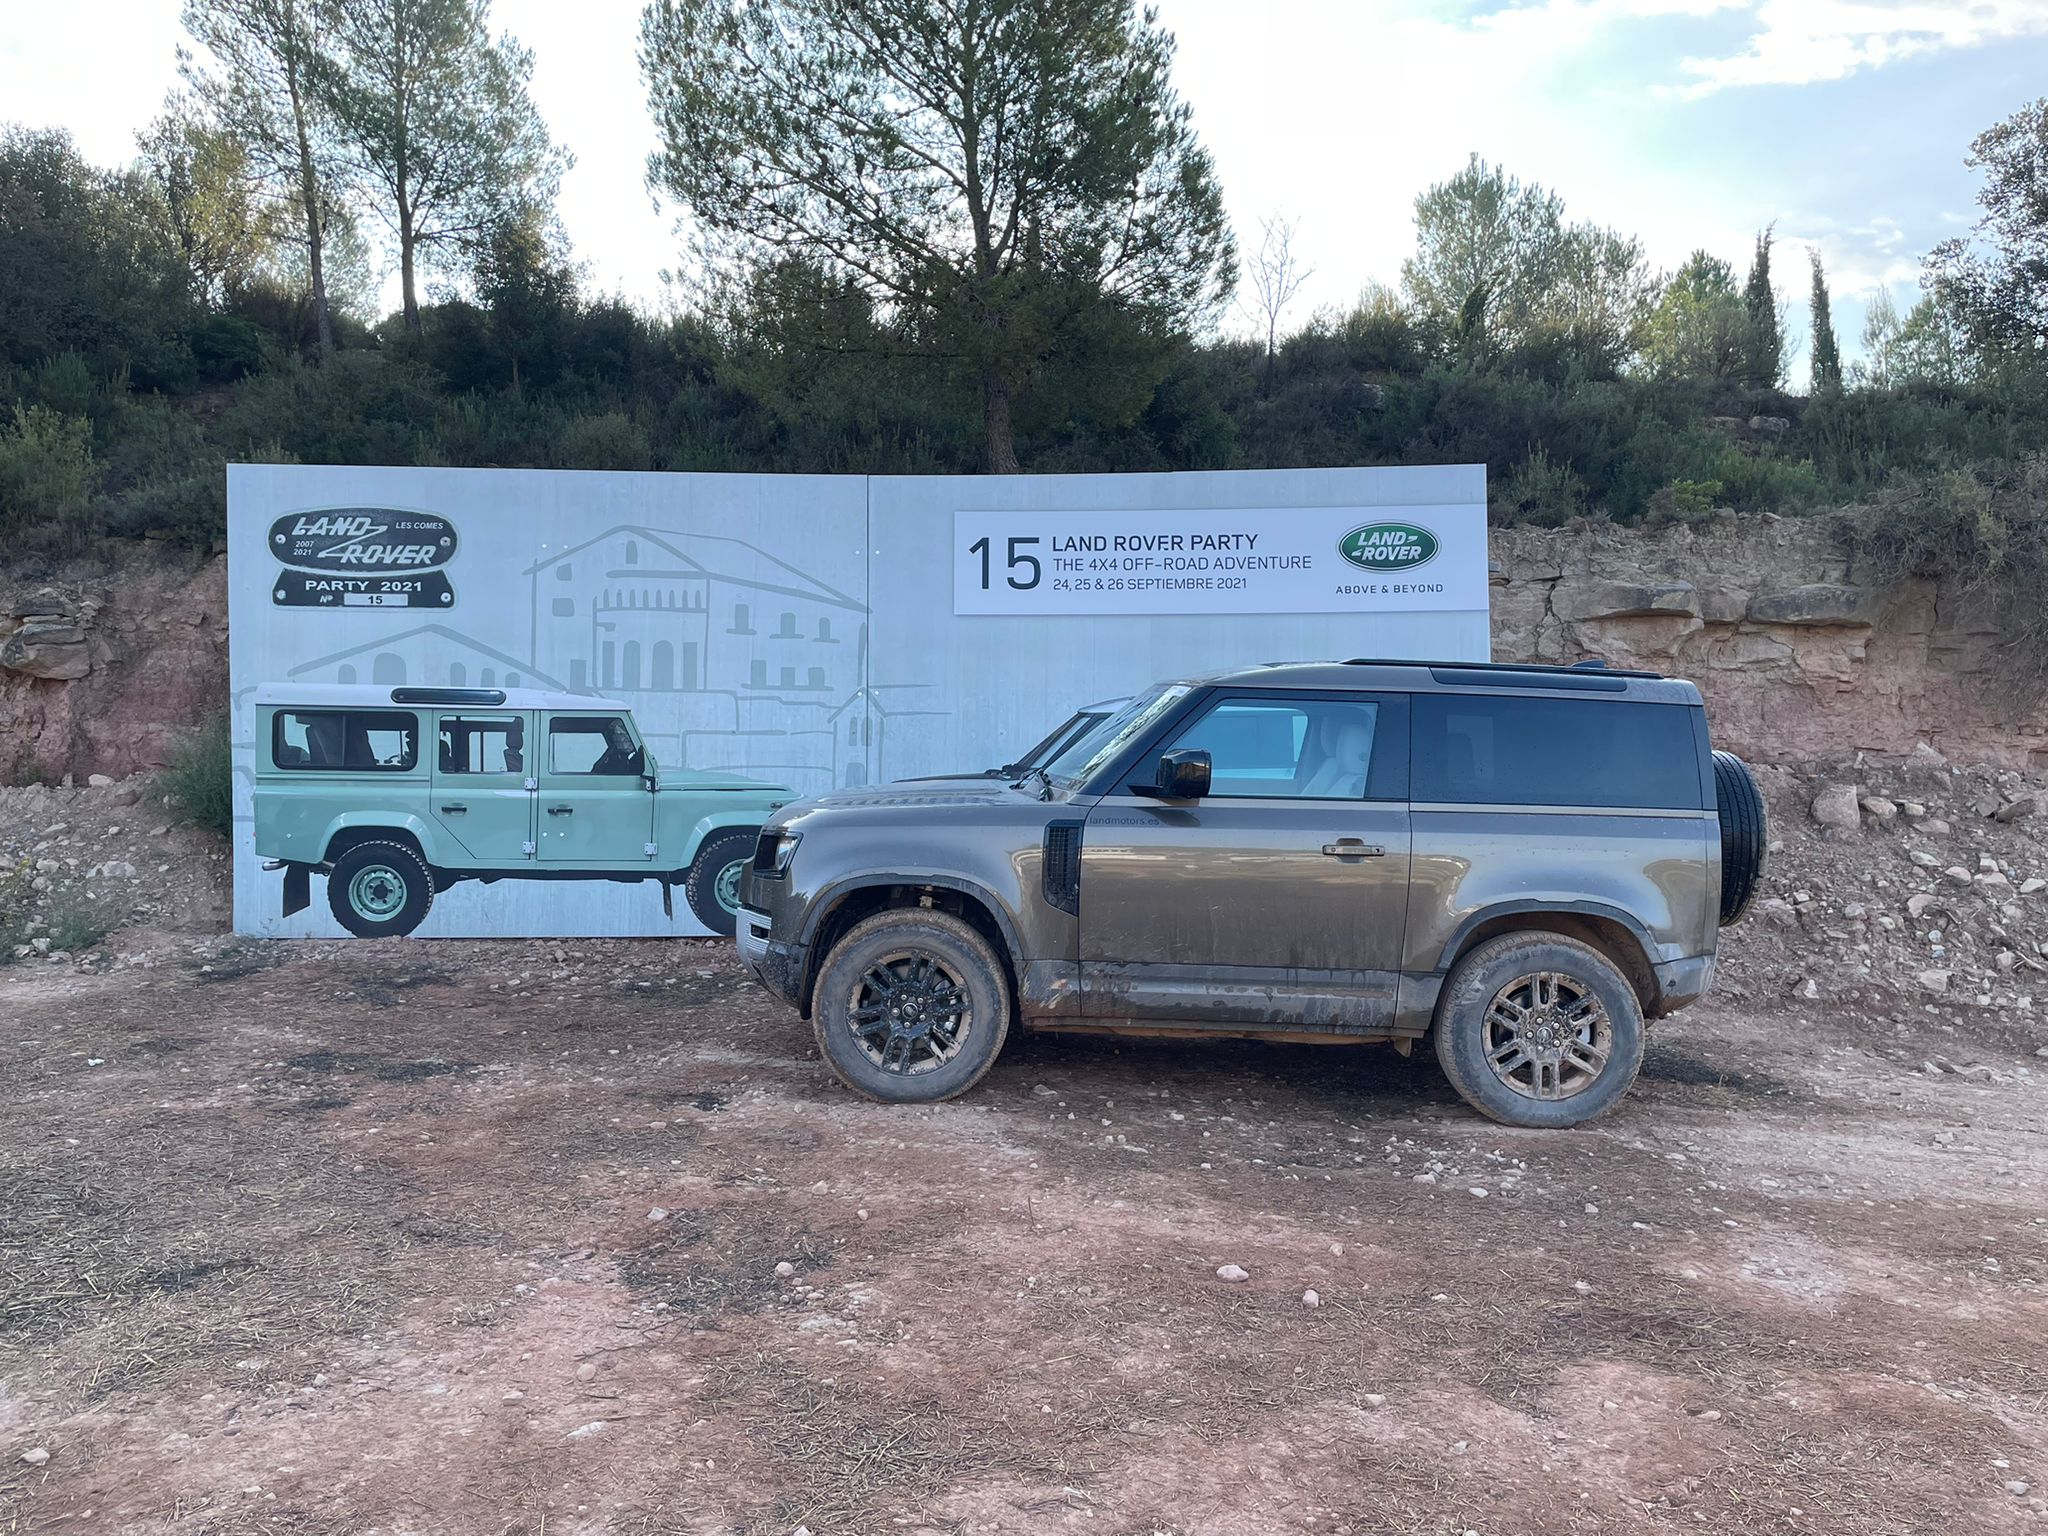 Land Rover Party 2021